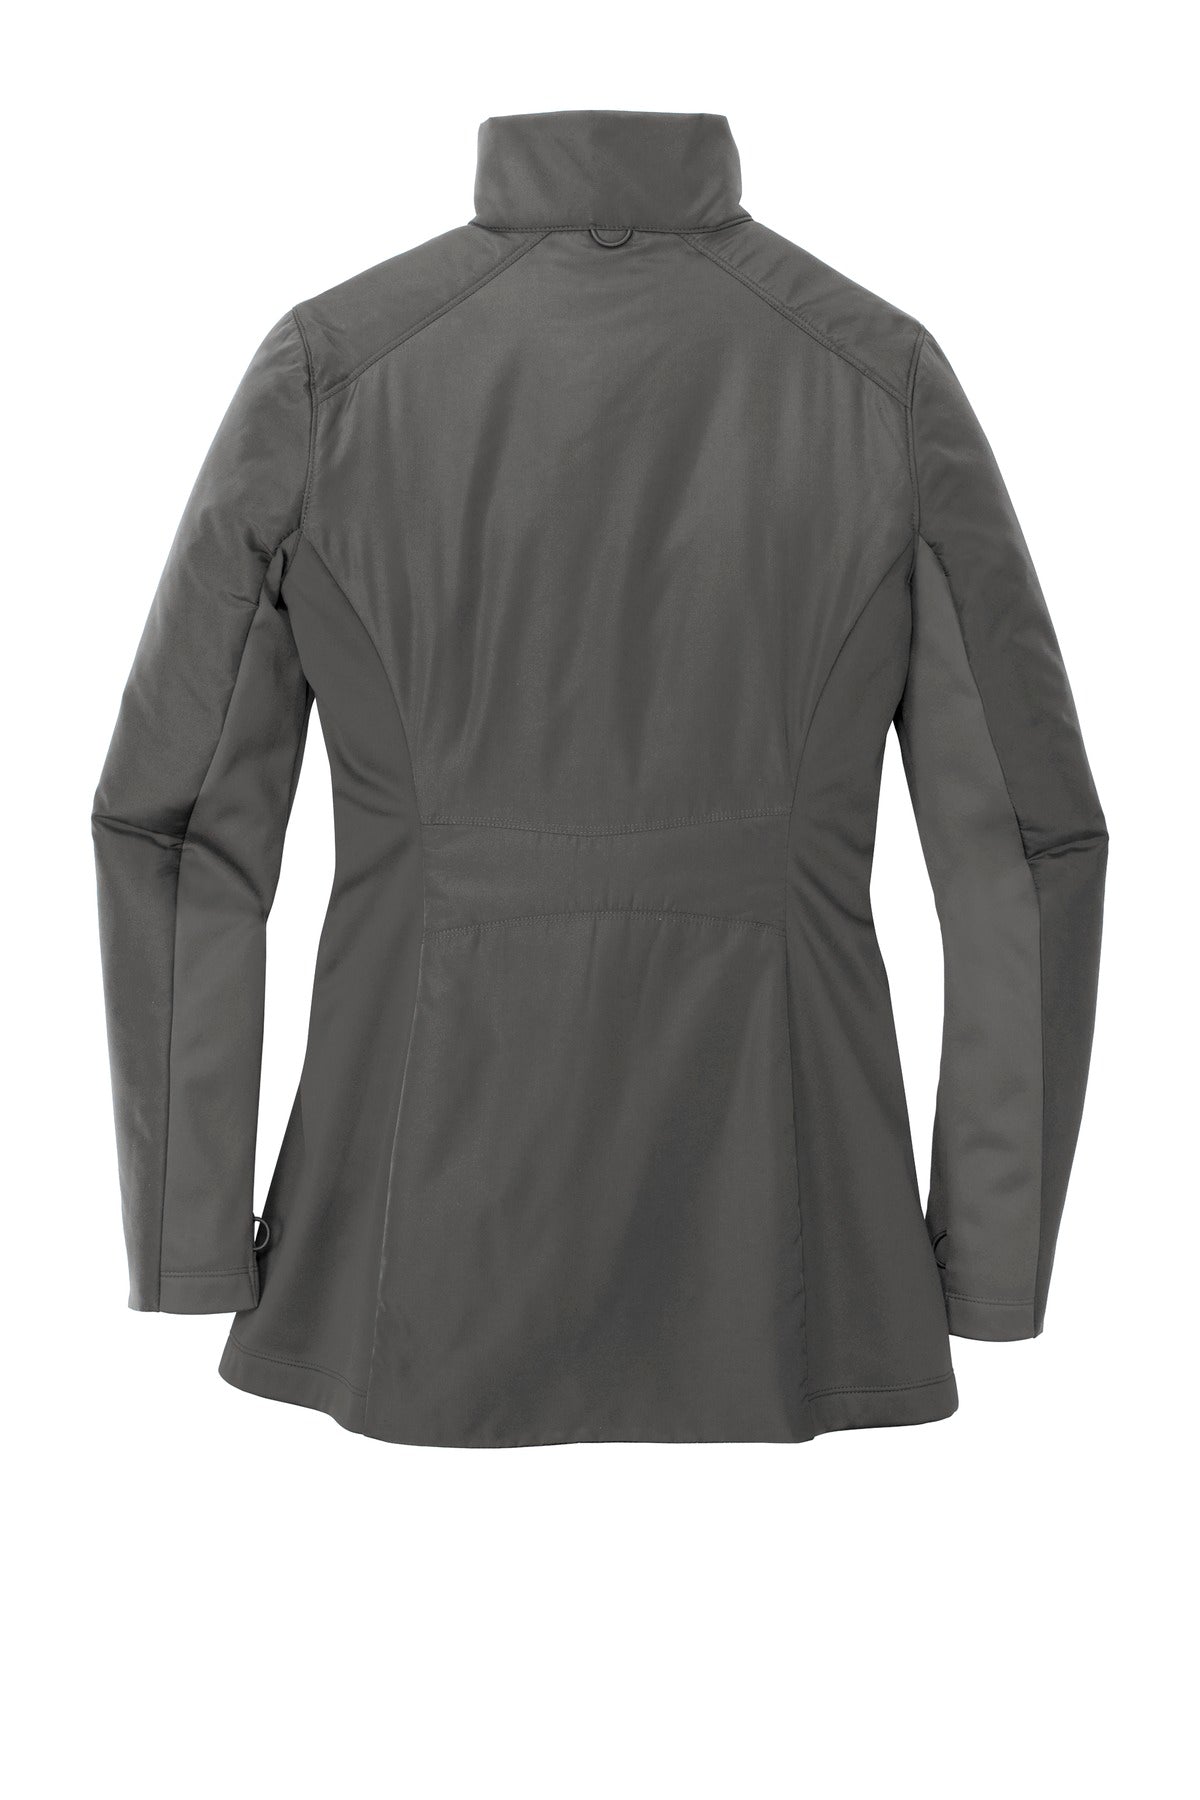 Port Authority Ladies Collective Insulated Jacket. L902